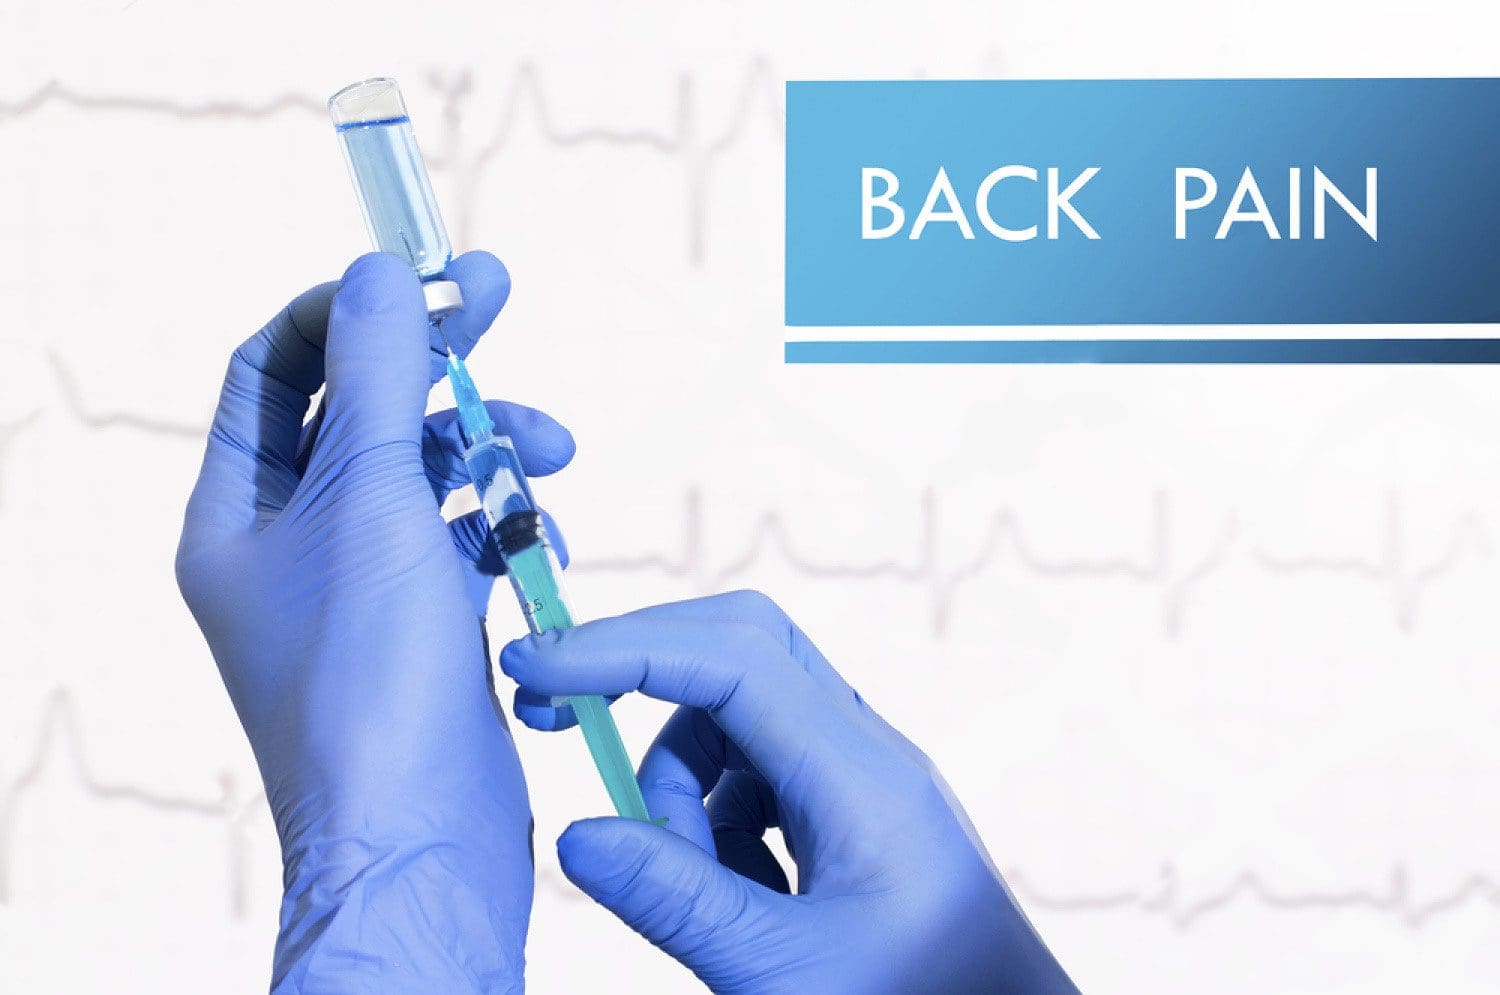 back pain syringe is filled with injection